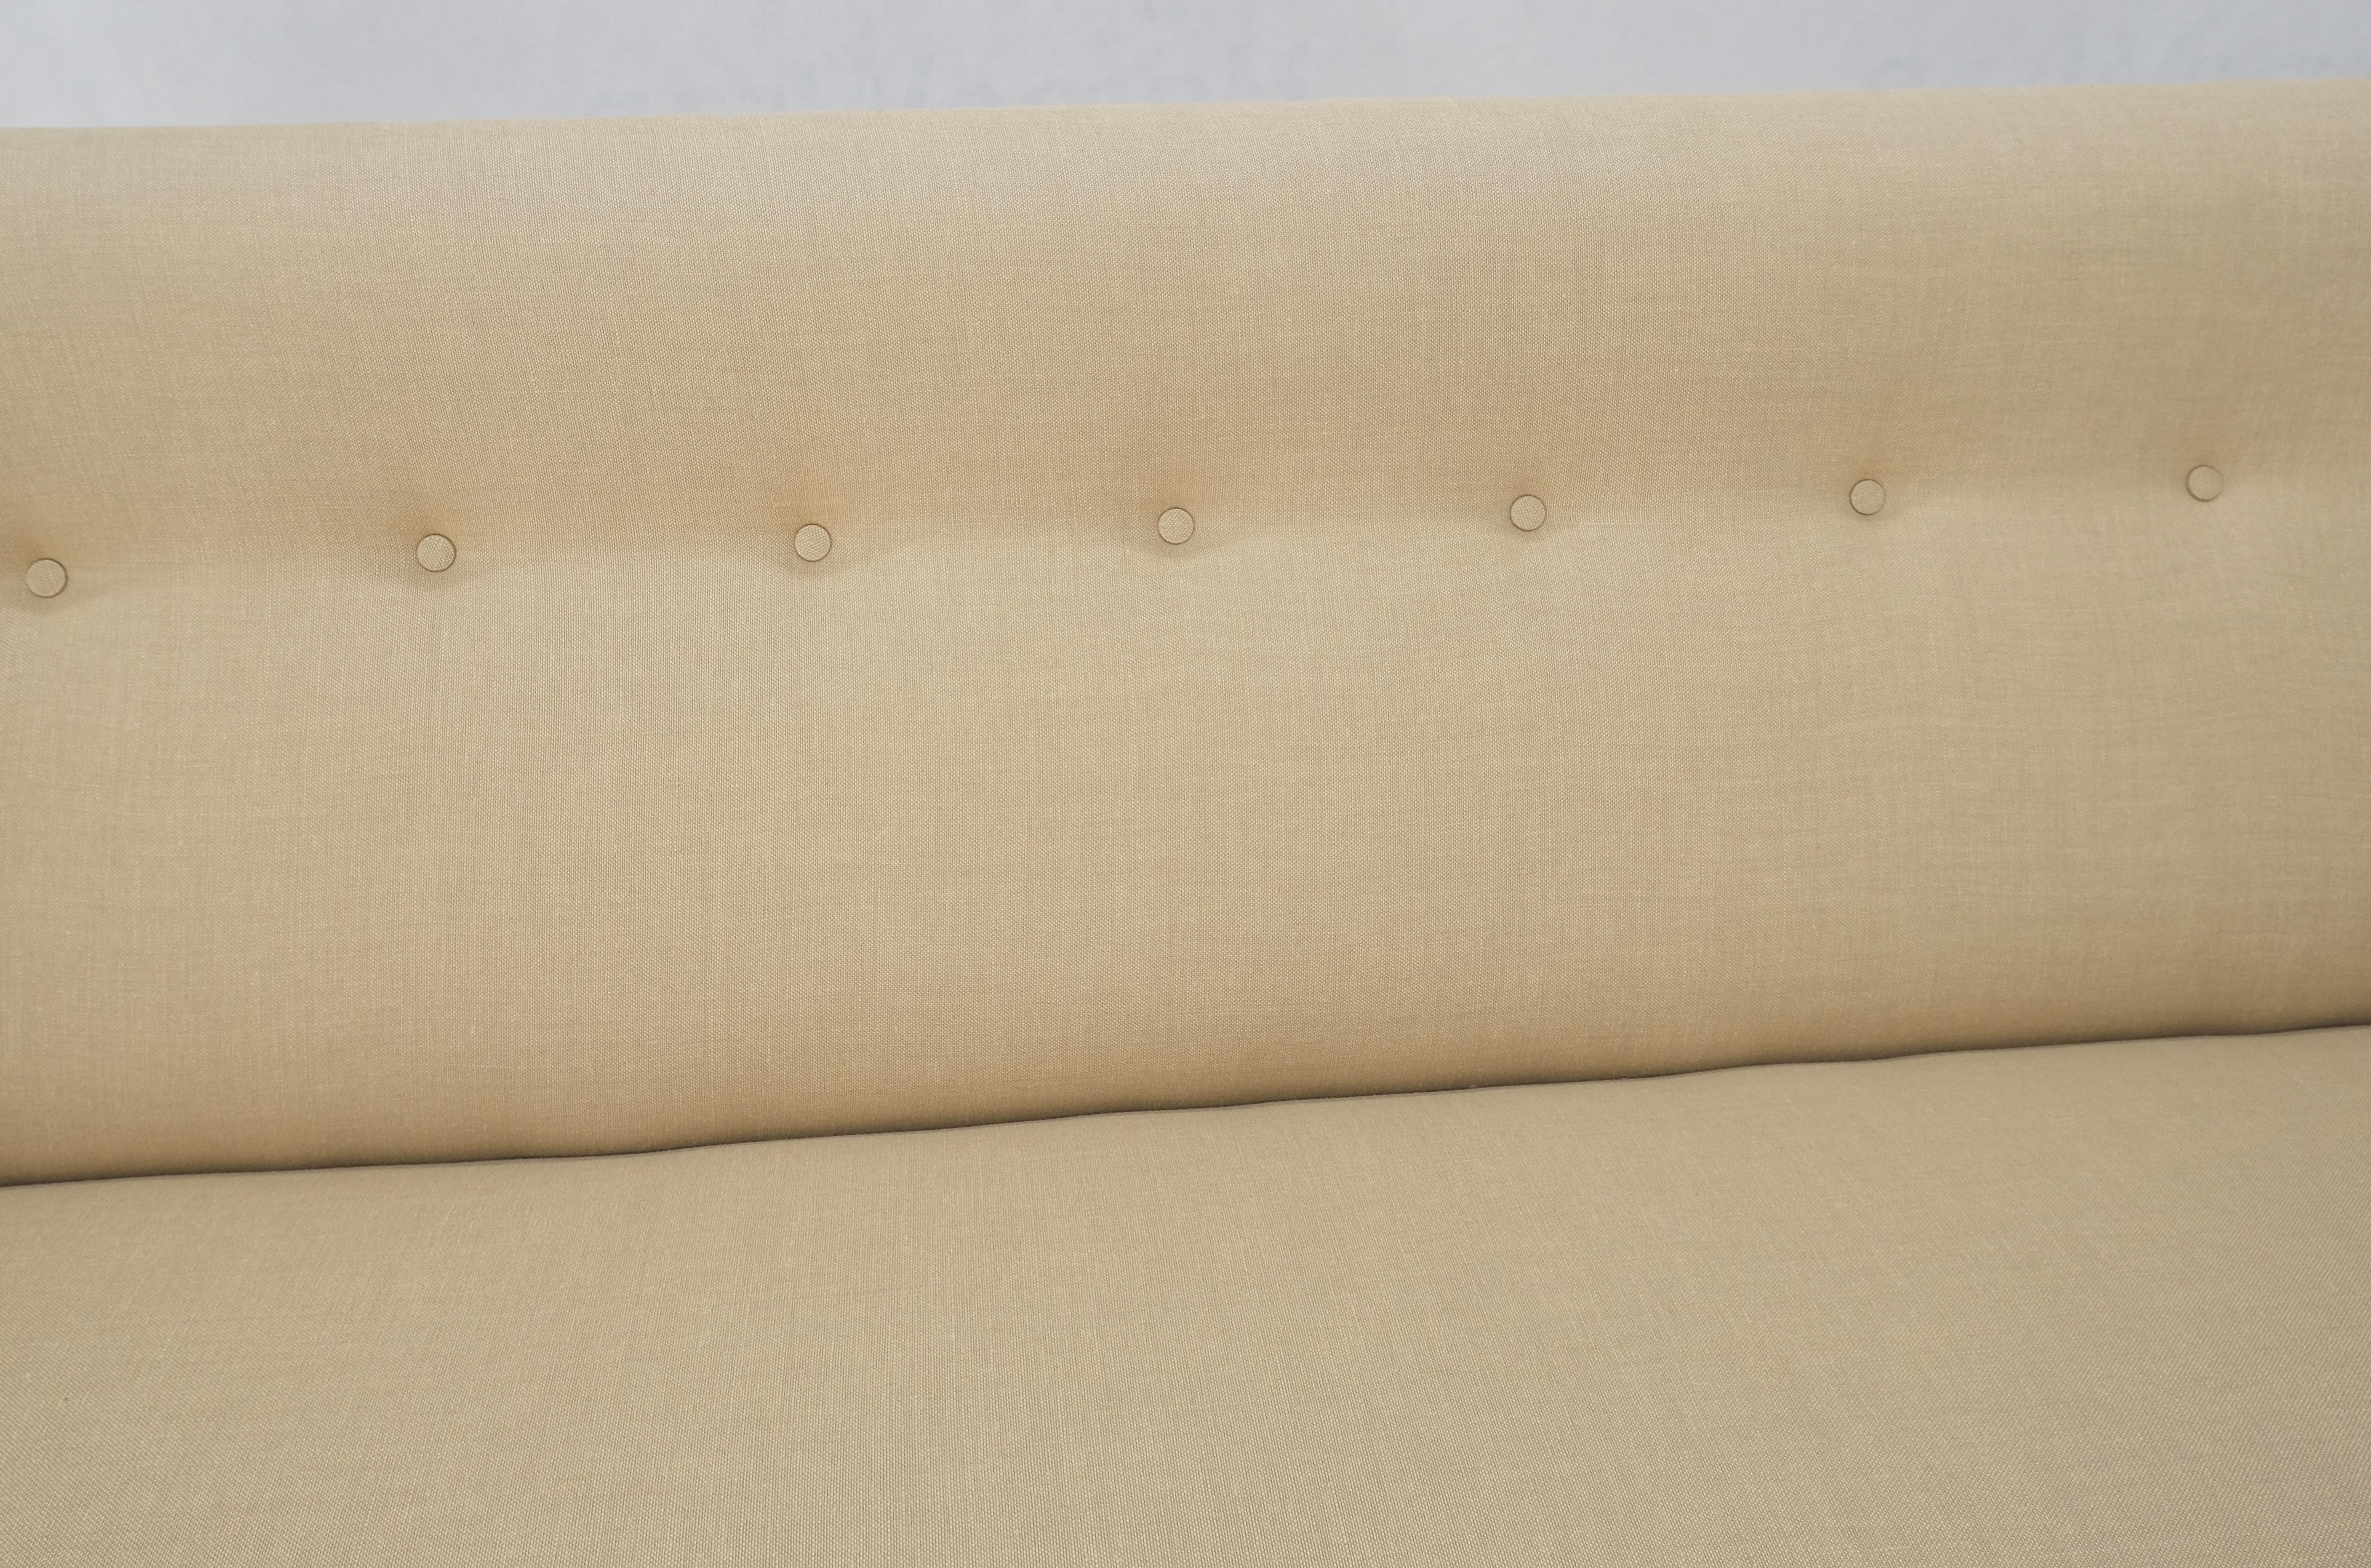 Jens Risom NEW Beige Linen Upholstery Oiled Walnut Frame c1960s Sofa Couch MINT! For Sale 4